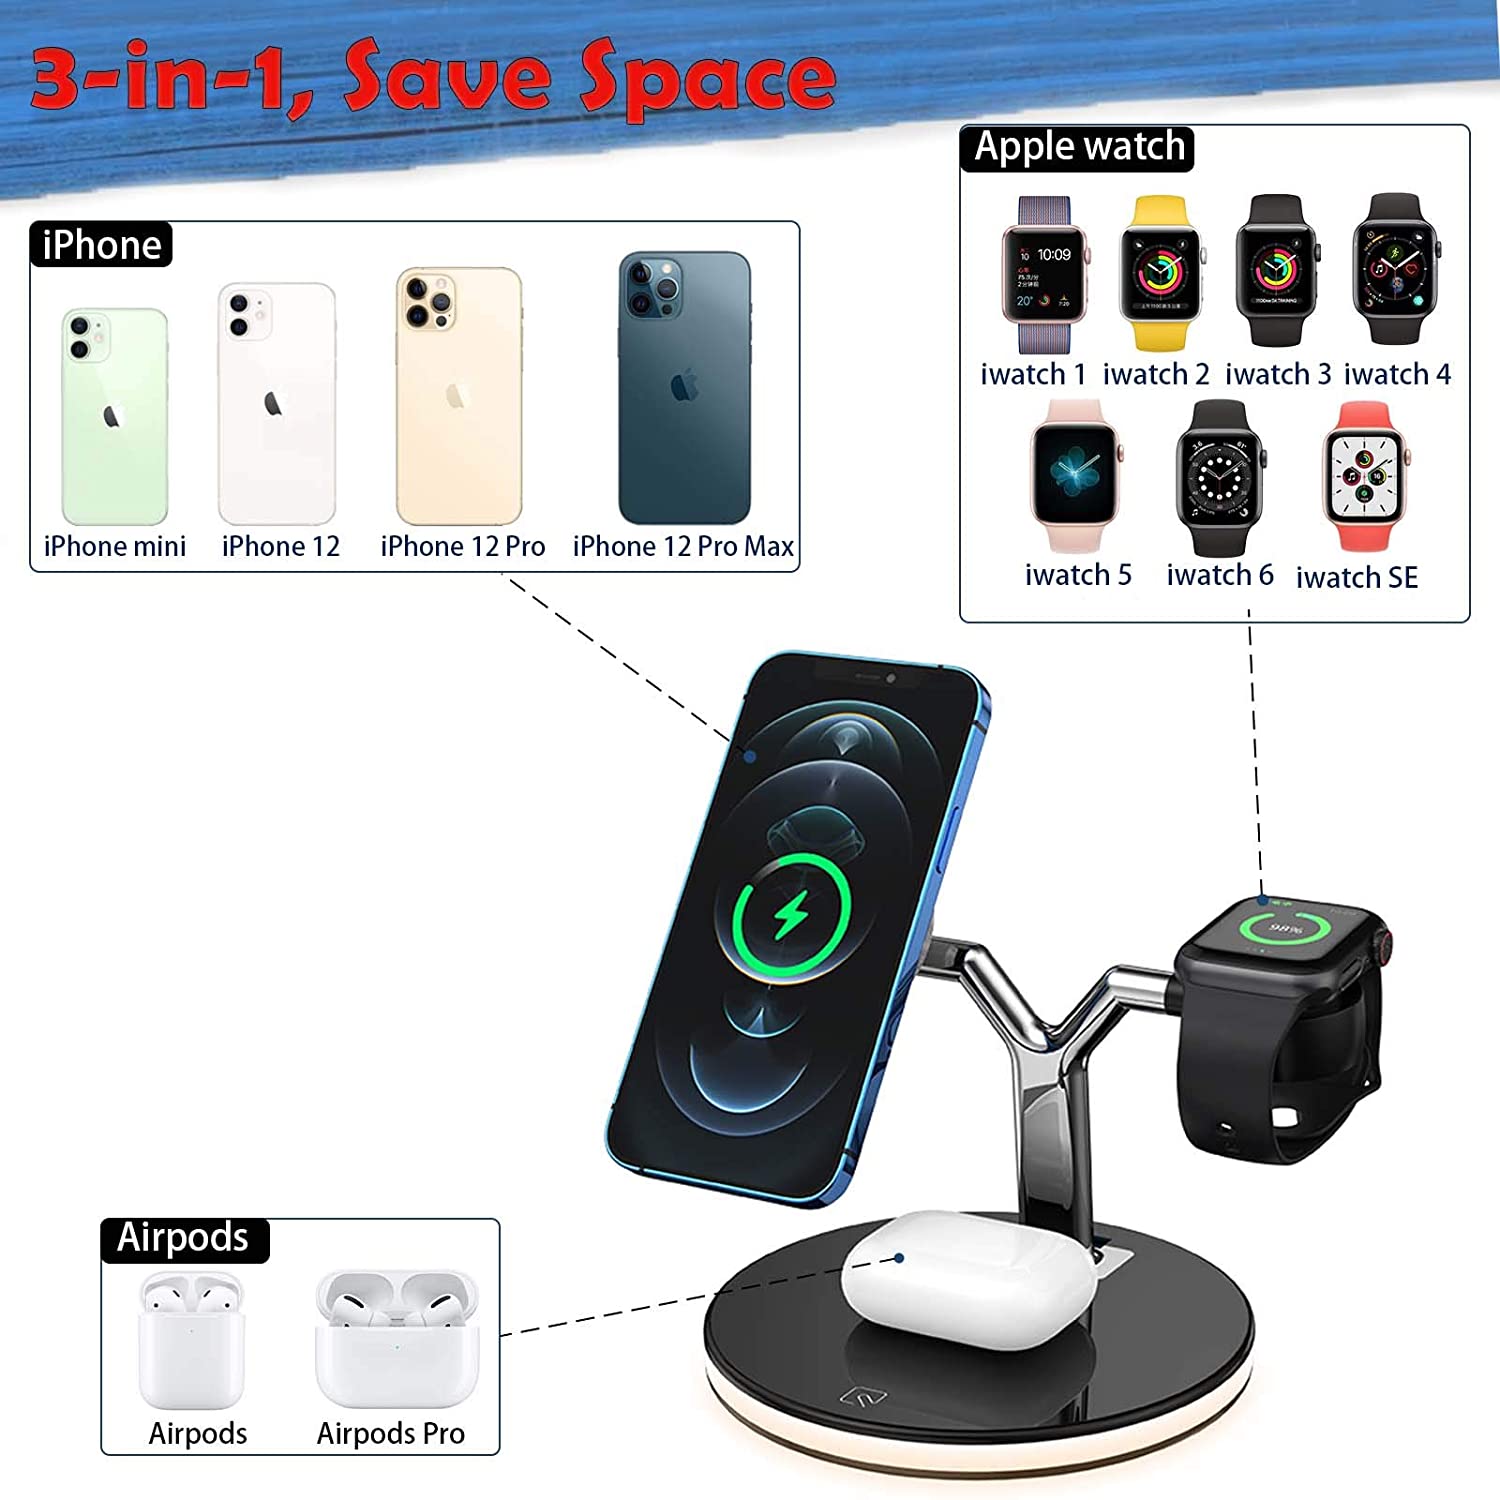 25W 3 in 1 Magnet Qi Fast Wireless Charger For Iphone 12 Mini Pro MAX Charging Station For Apple Watch 6 5 4 3 2 1 AirPods Pro and Android Samsung Galaxy with Qi charging